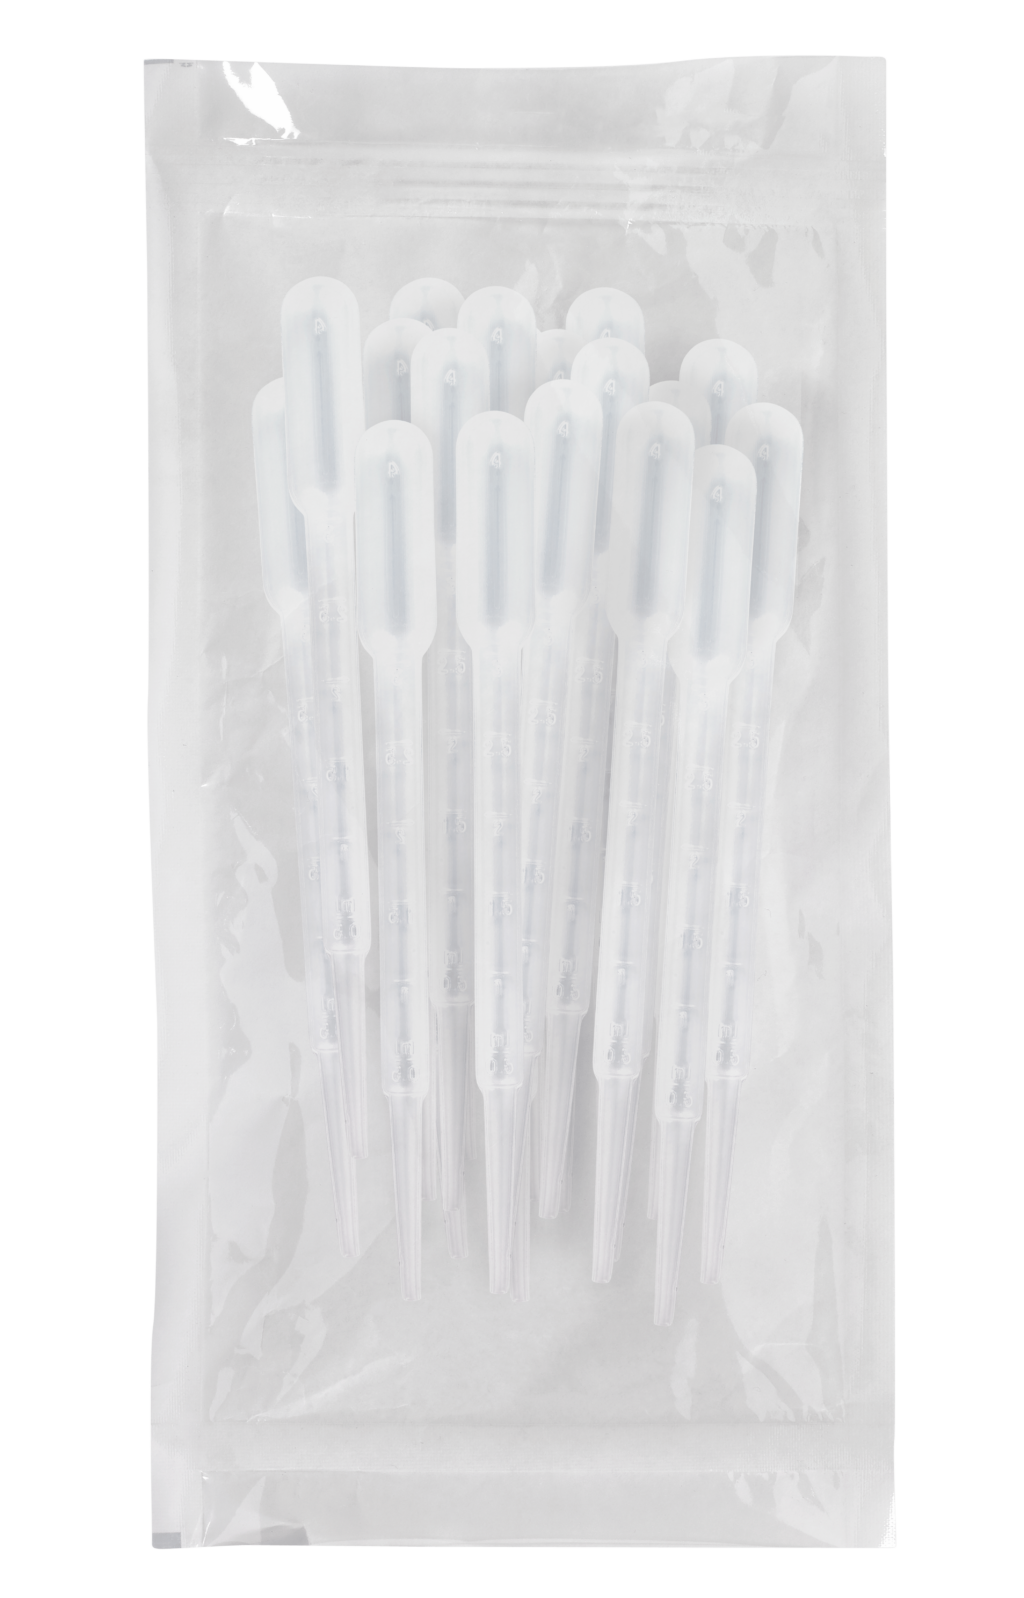 Disposable Transfer Pipet 200CS20 Transfer Pipet Grad. up to 3 mL at 0.5 mL Intervals with 3.5 mL - 20 per Peel Pouch, Sterile